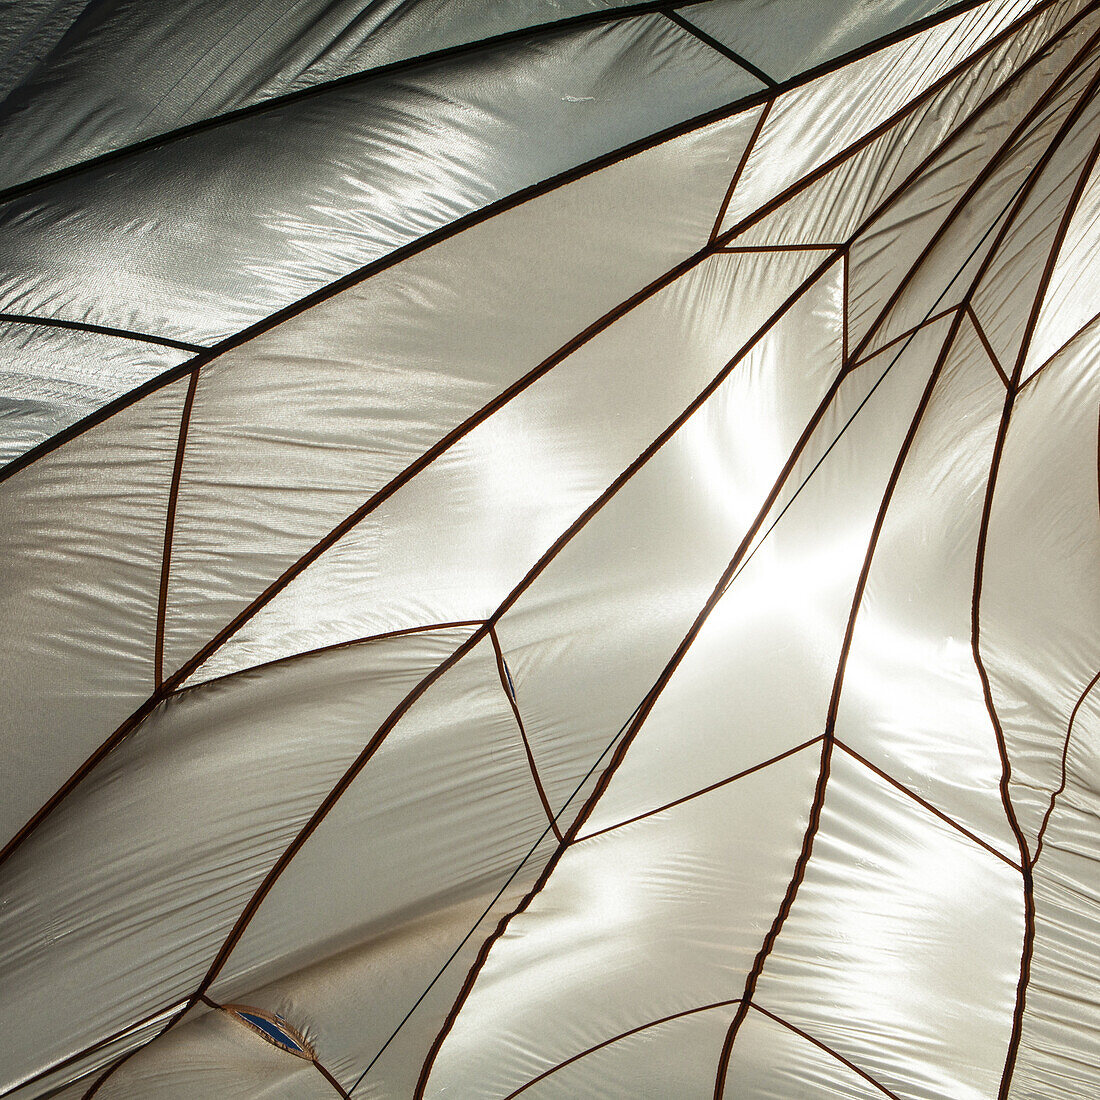 A White Silk Parachute looks like an insects wing as it is backlit by the sun.